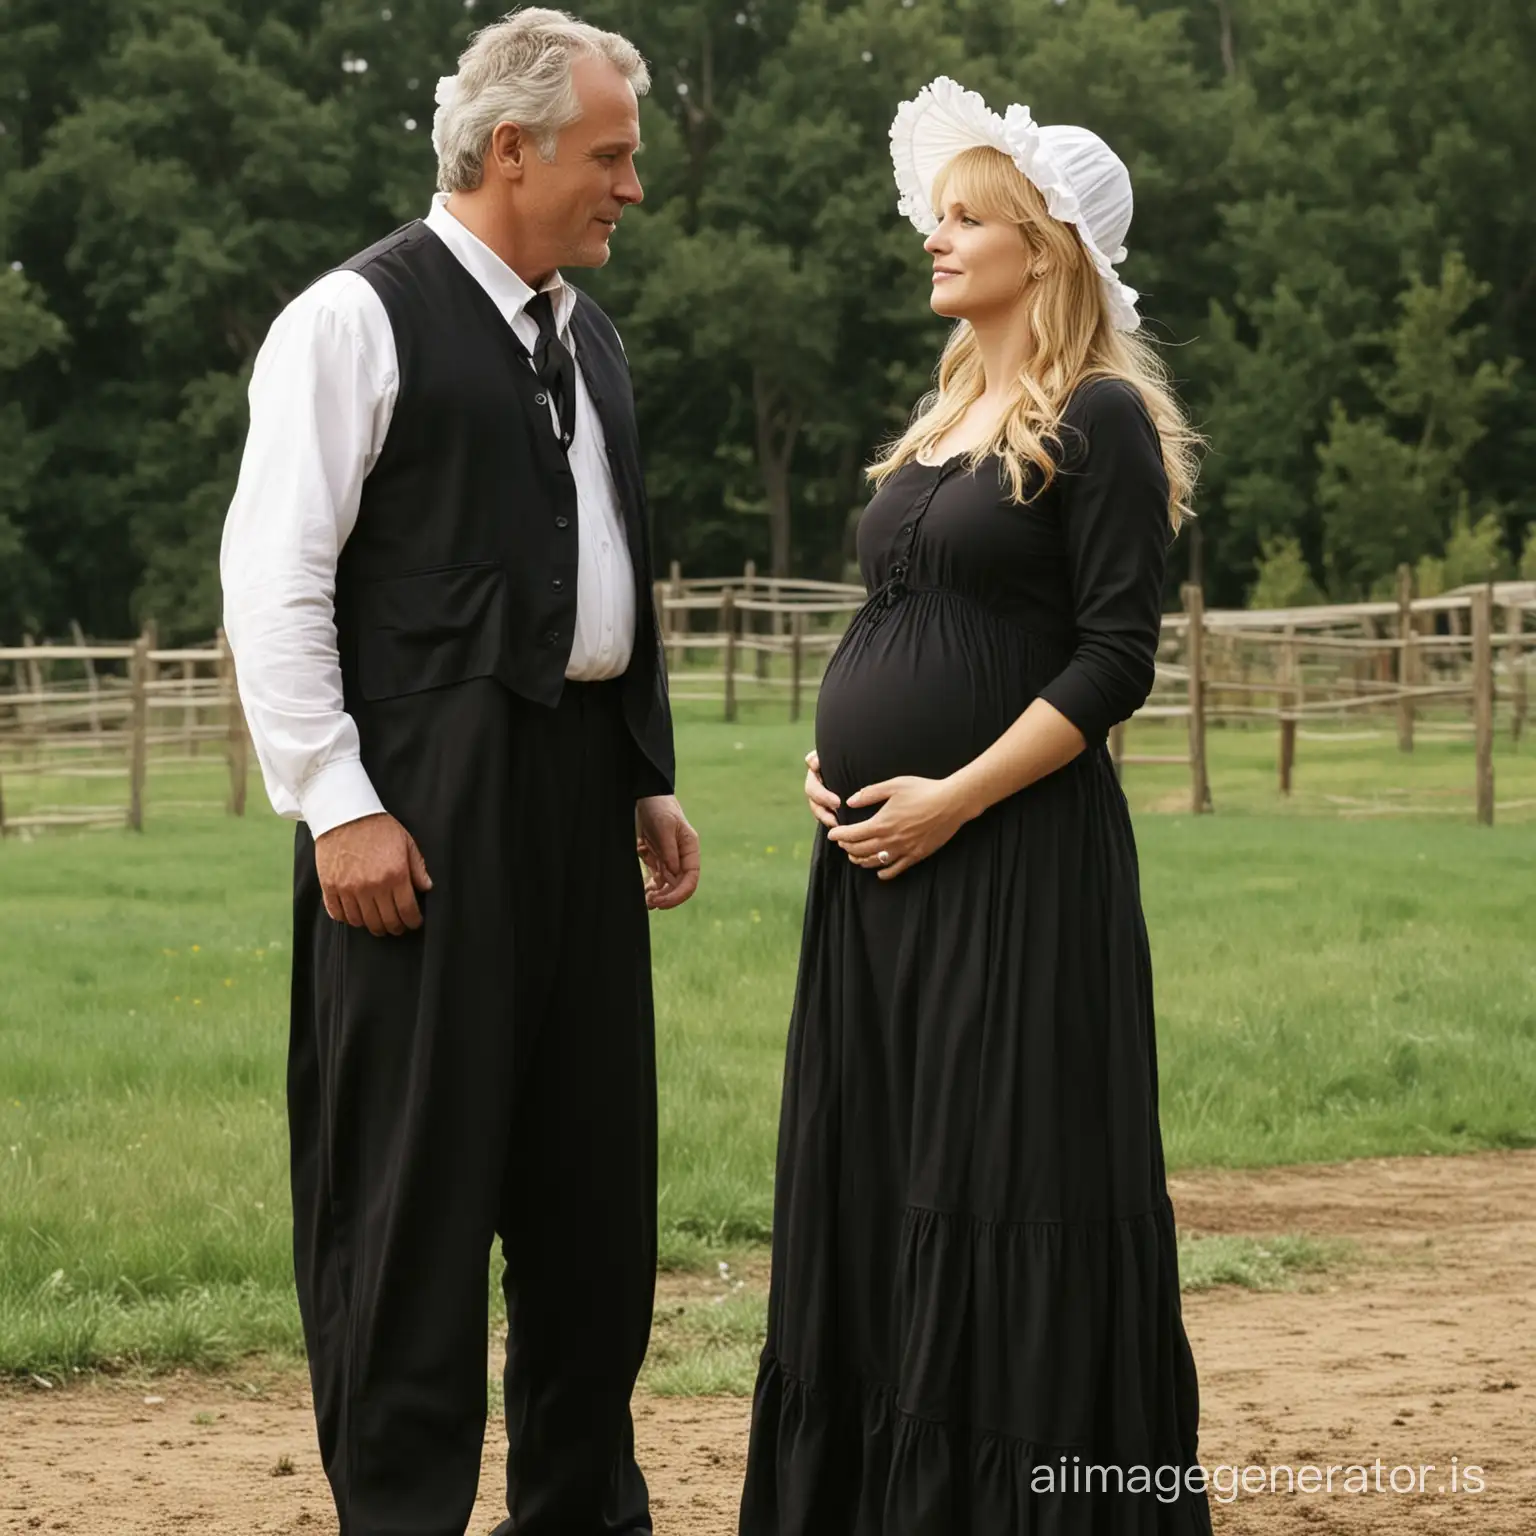 Major Samantha Carter from SG1 wearing a black floor-length loose billowing Amish maternity maxi dress with an apron and a frilly white bonnet kissing an old man who seems to be her newlywed husband